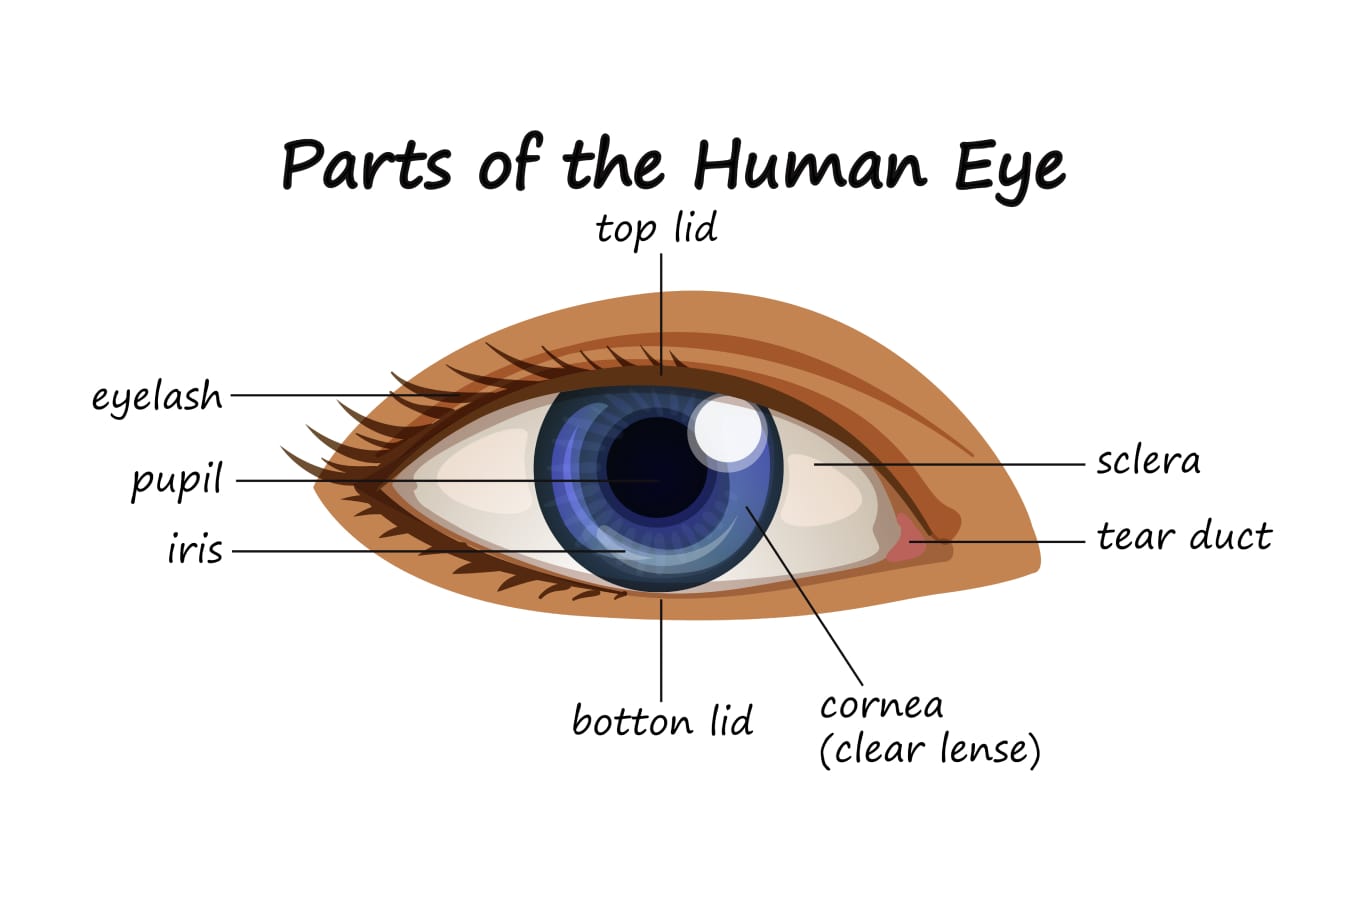 What are the 7 parts of the eye?